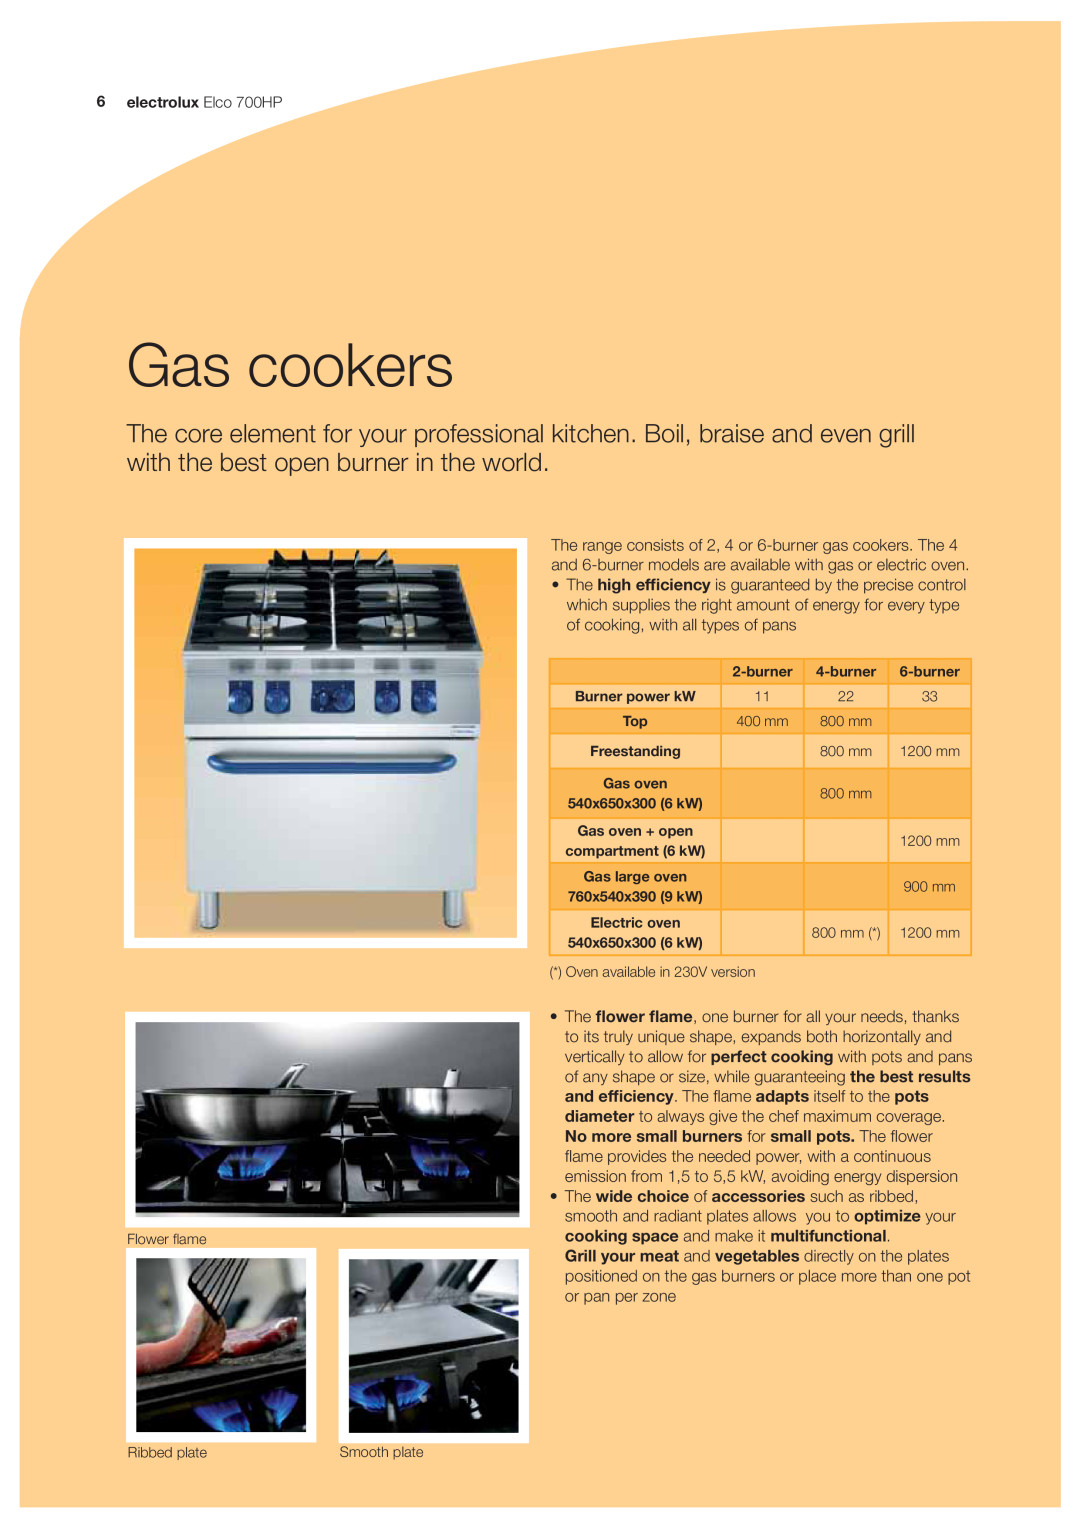 Electrolux manual Gas cookers, 6electrolux Elco 700HP, burner 